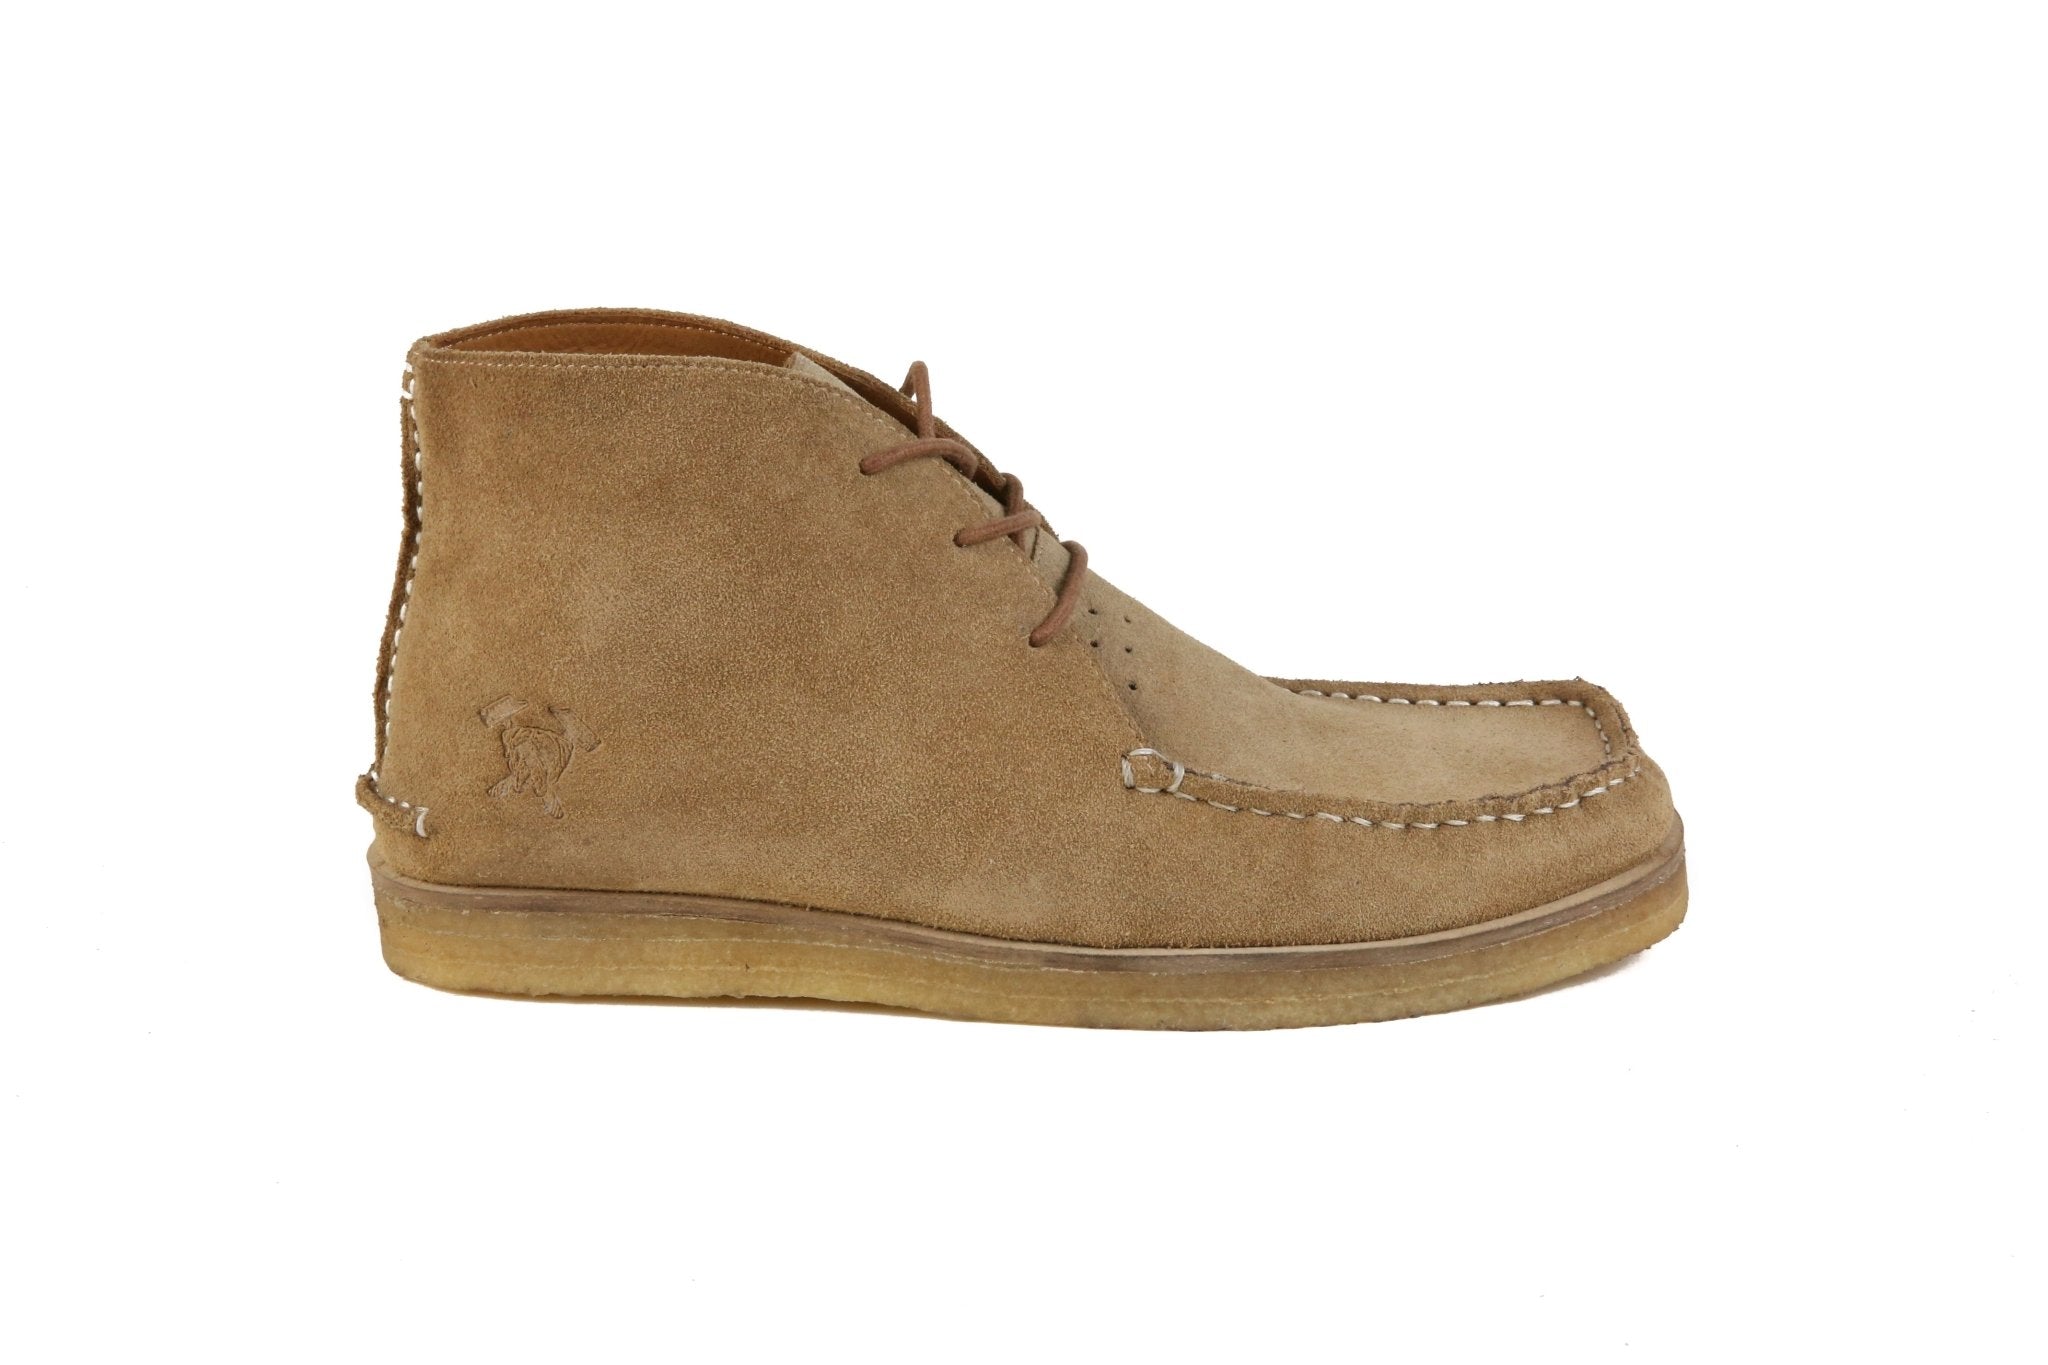 Hound & Hammer The Wallace | Sand Ankle Boots for Men